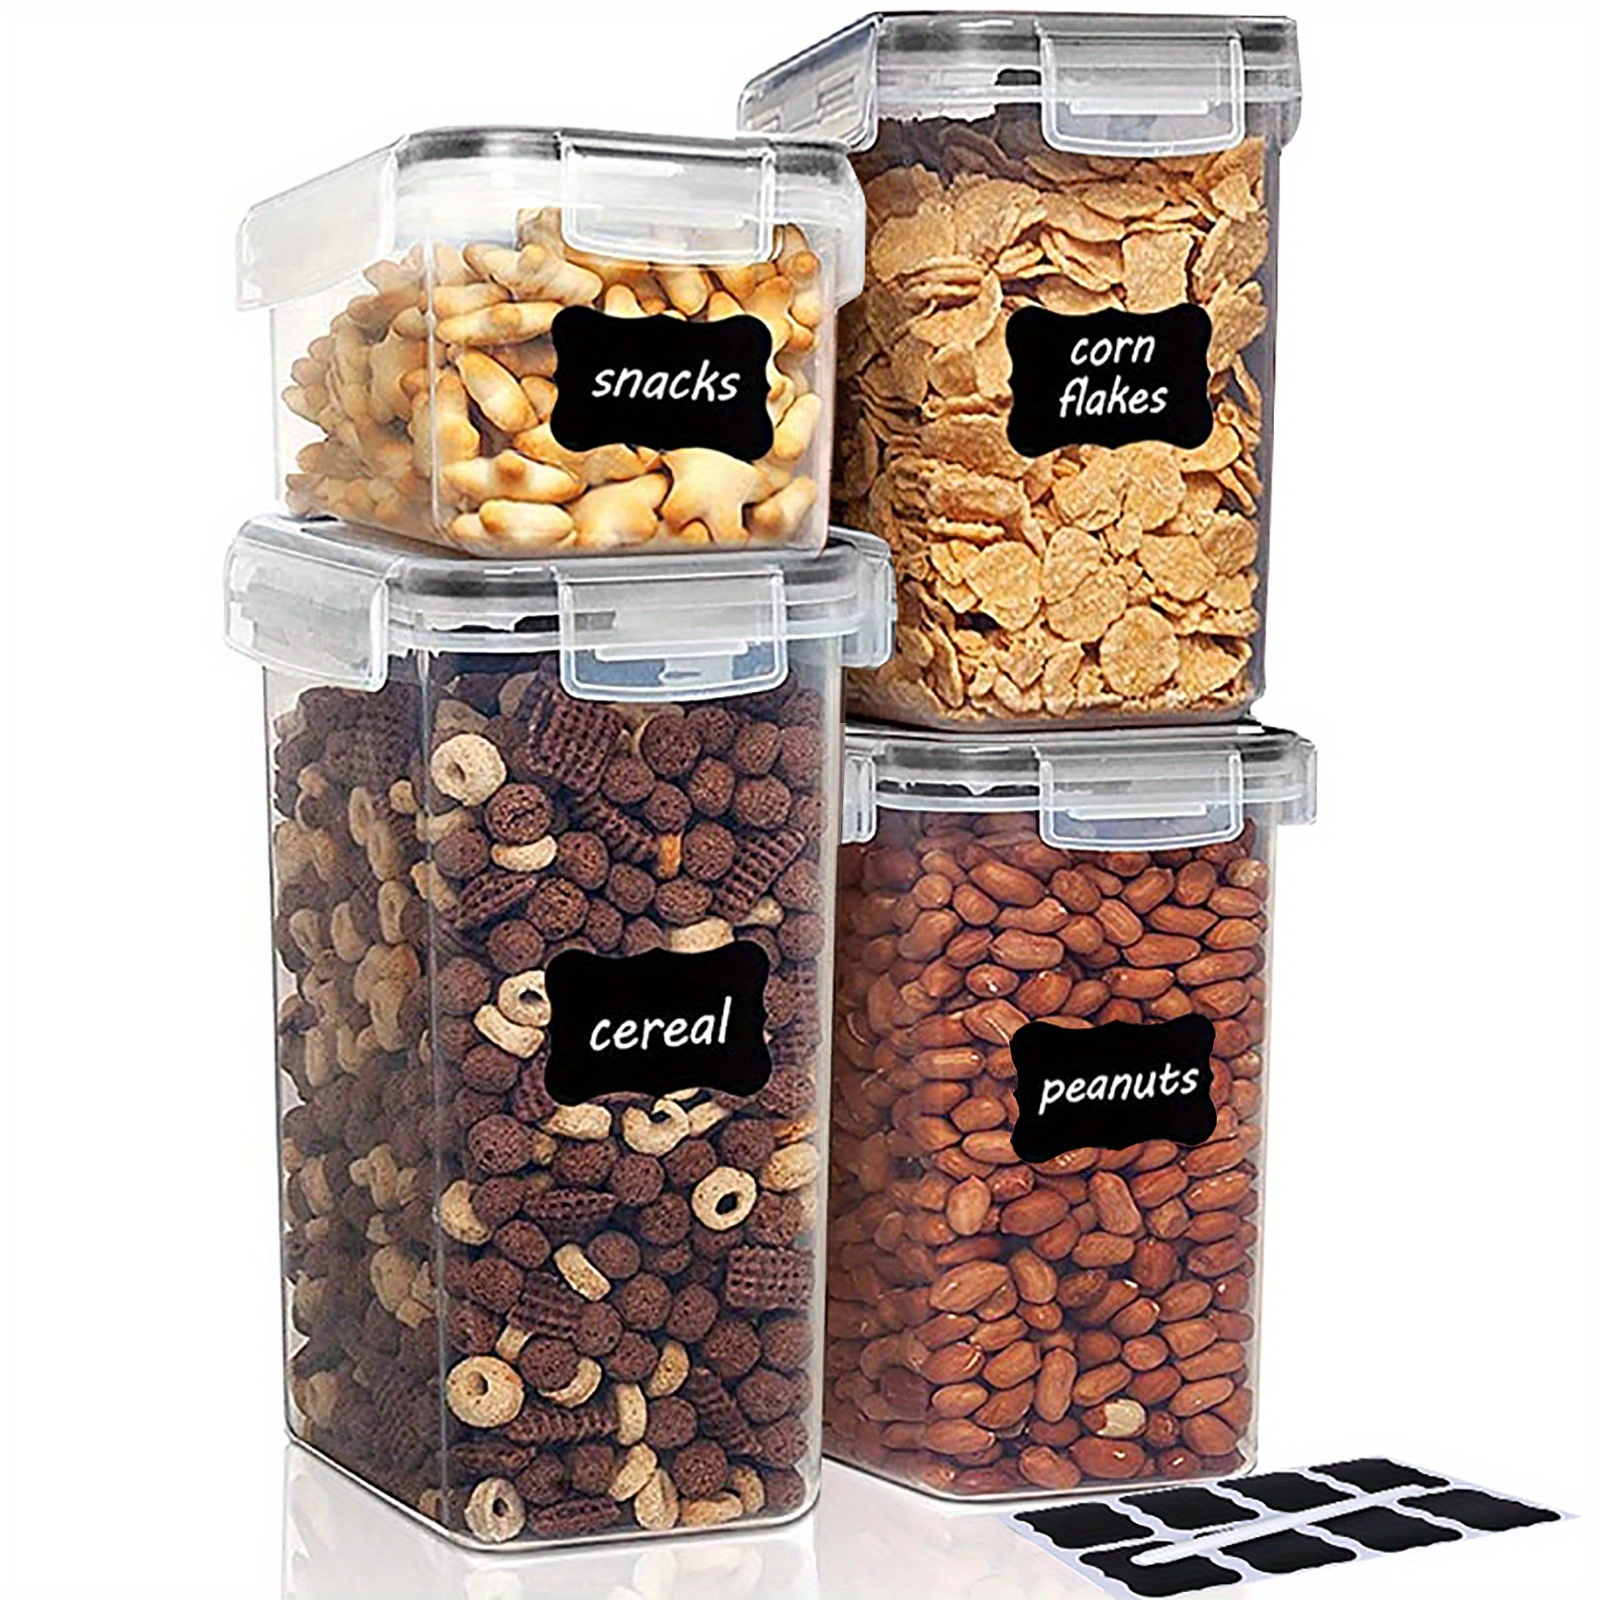 How to Choose the Right Food Storage Containers for Your Kitchen